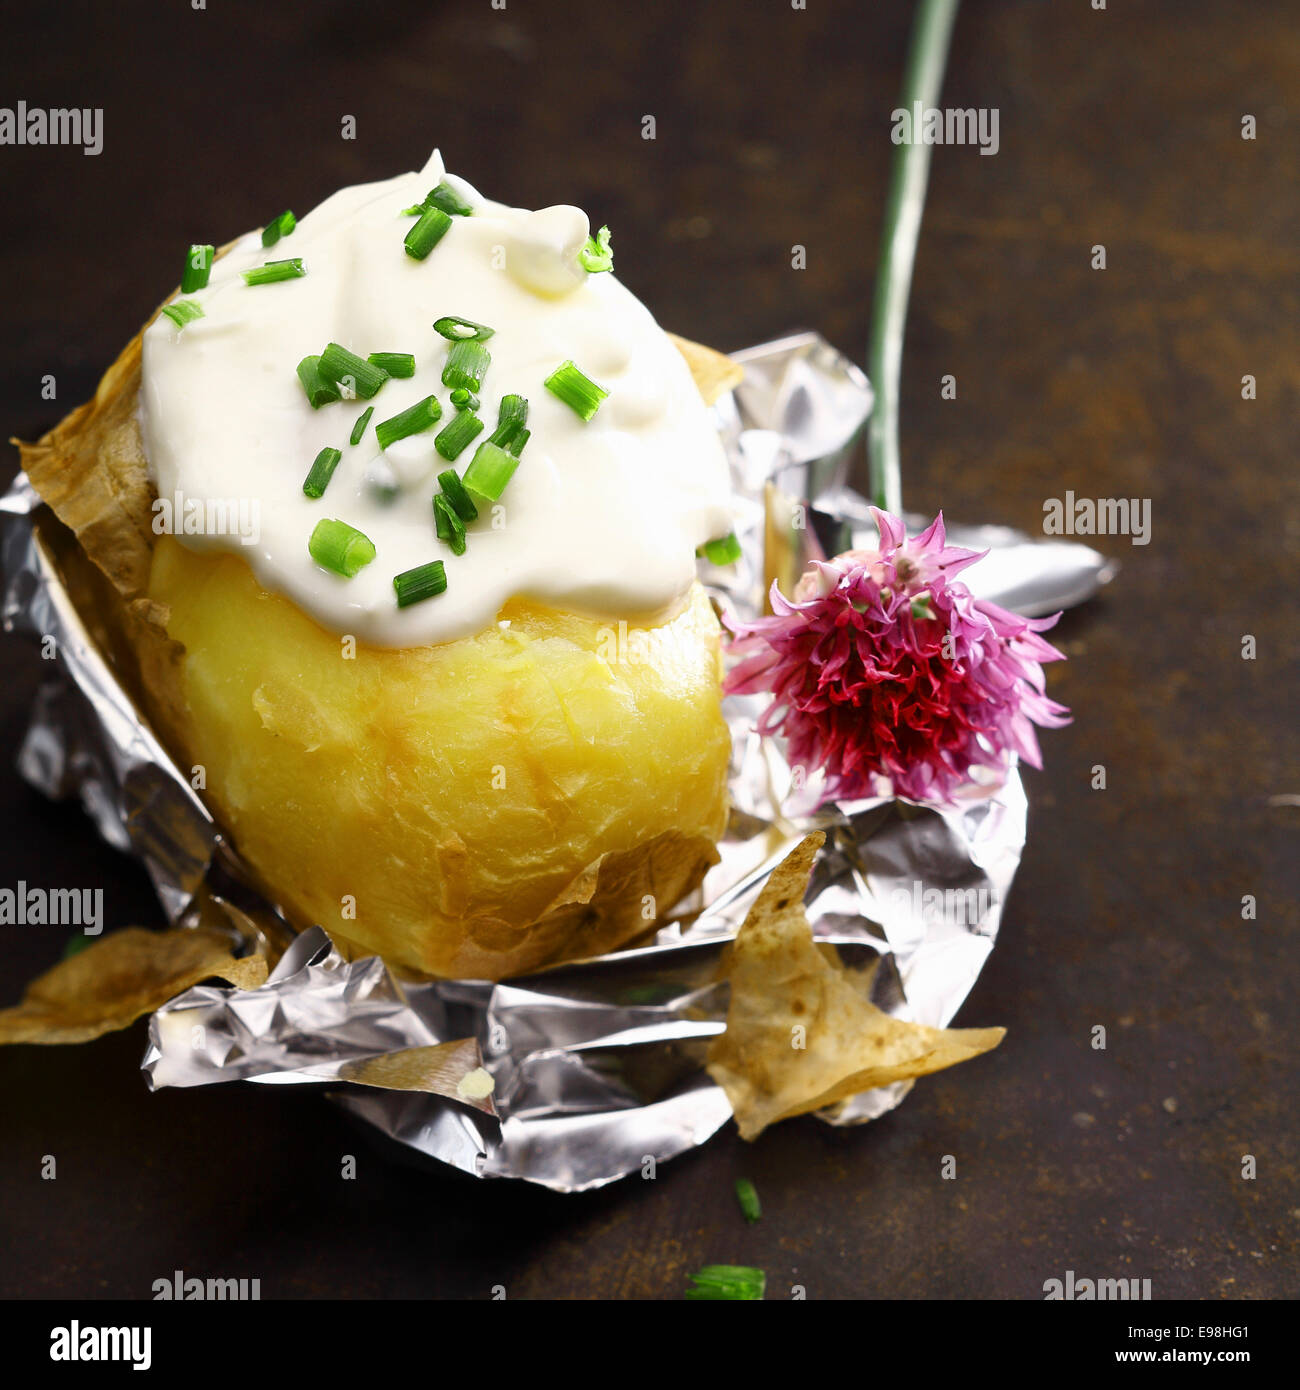 Foil baked potato with sour cream and chopped fresh chives with a flower off a chive plant served partially peeled on its foil wrapper Stock Photo